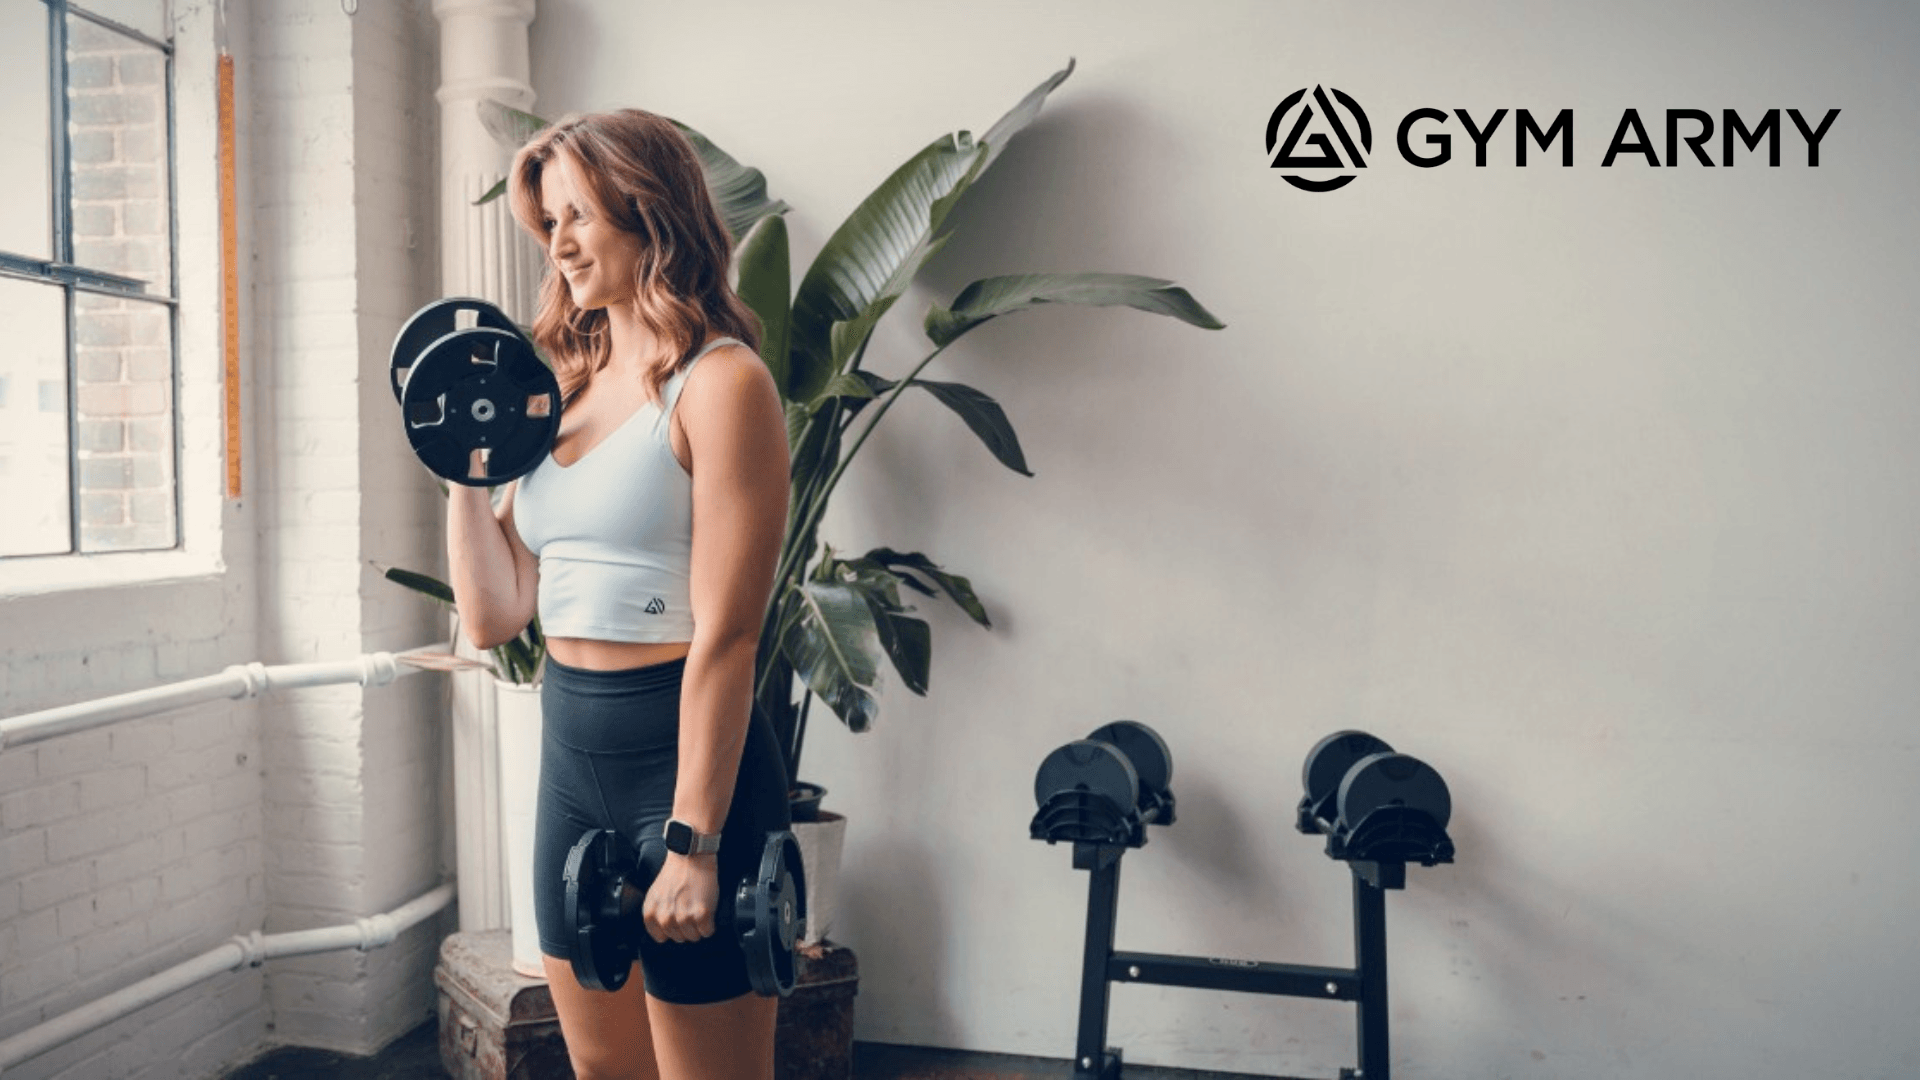 Get the Most Out of Winter - Gym Army